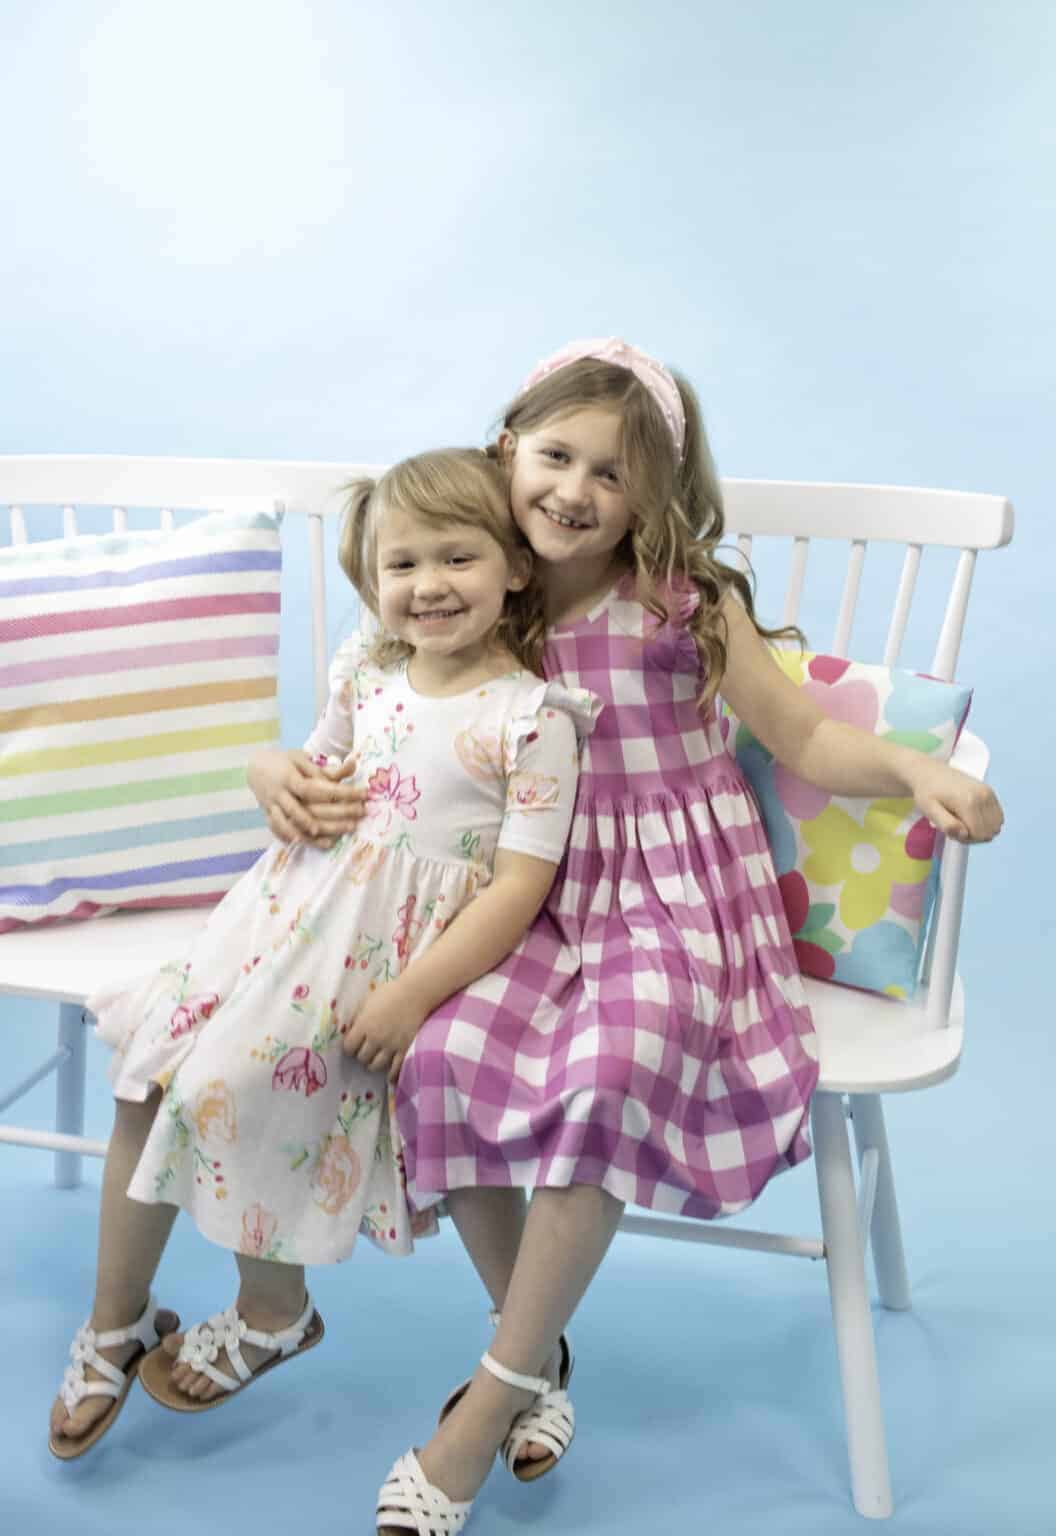 two girls smiling and sitting on a bench wearing homemade dresses in cute fabric prints